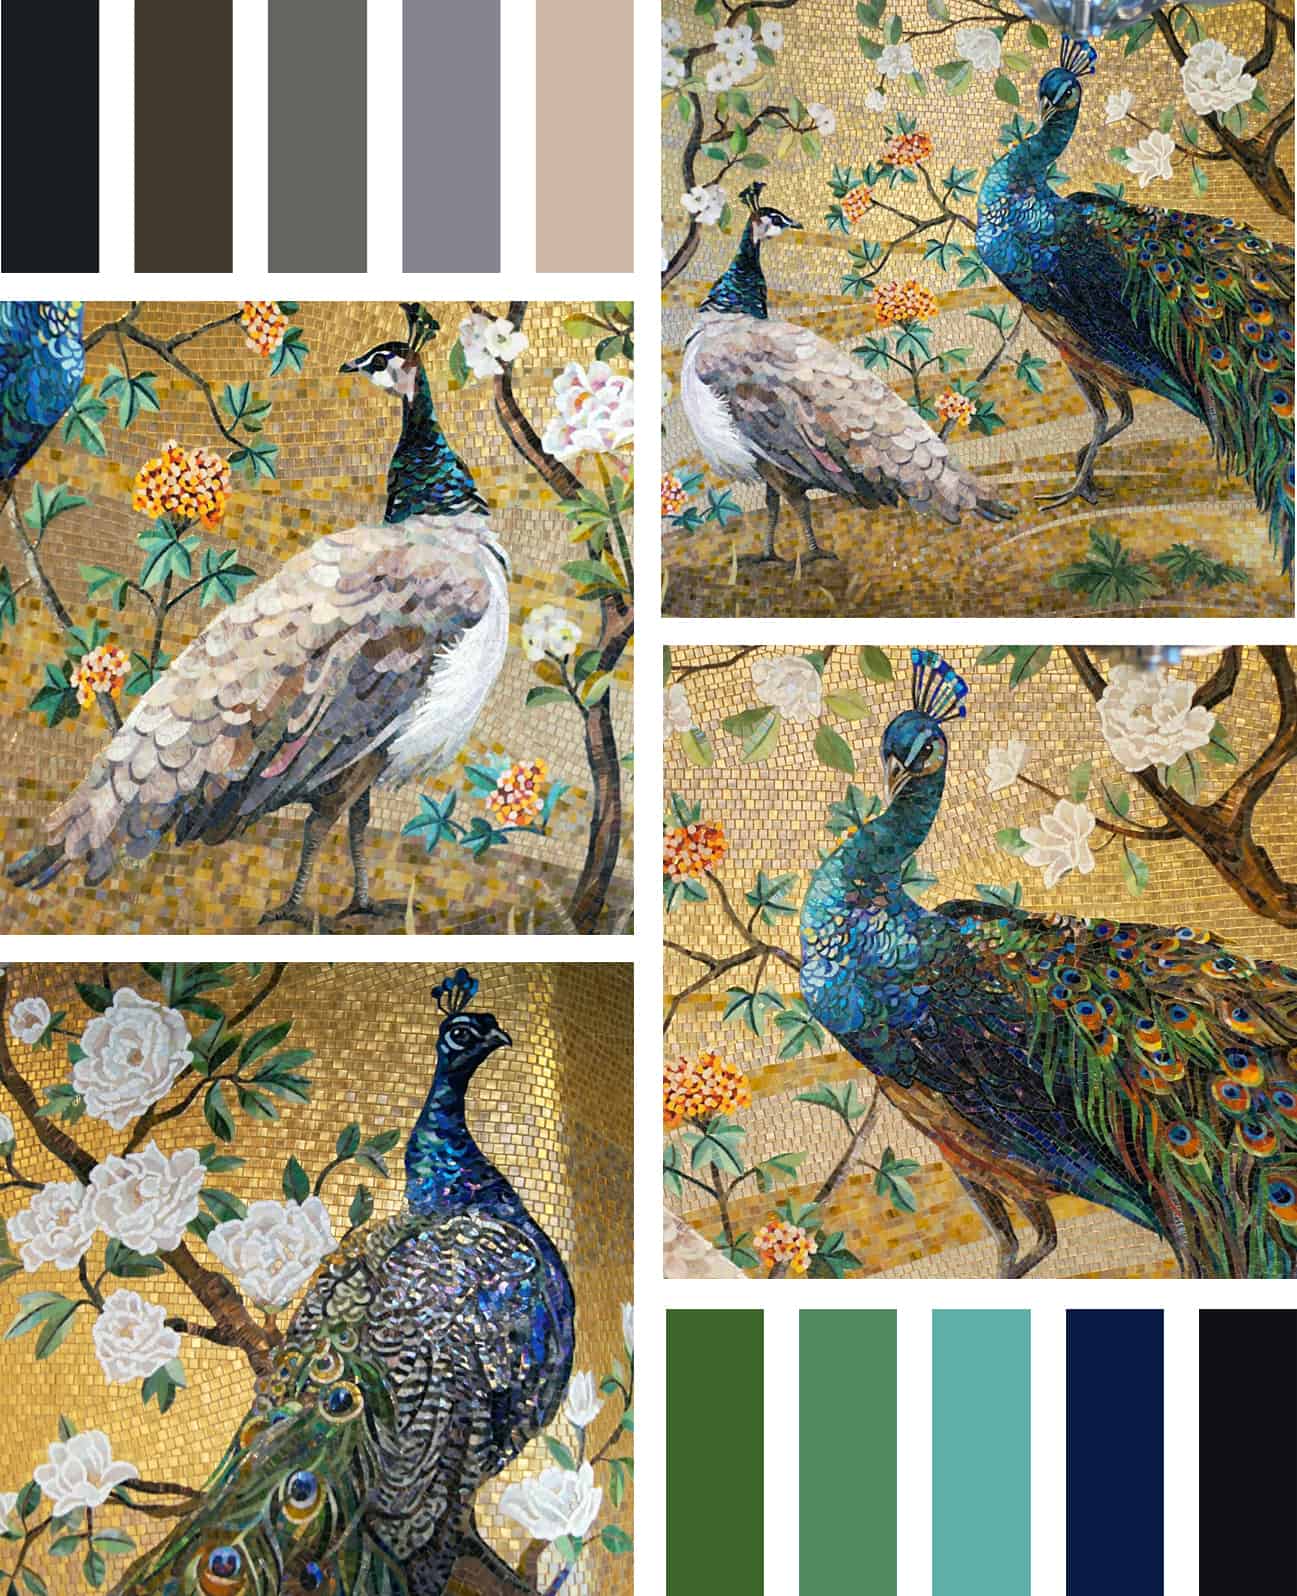 A collage of detailed and colorful mosaic artwork of peacocks with corresponding color palettes.